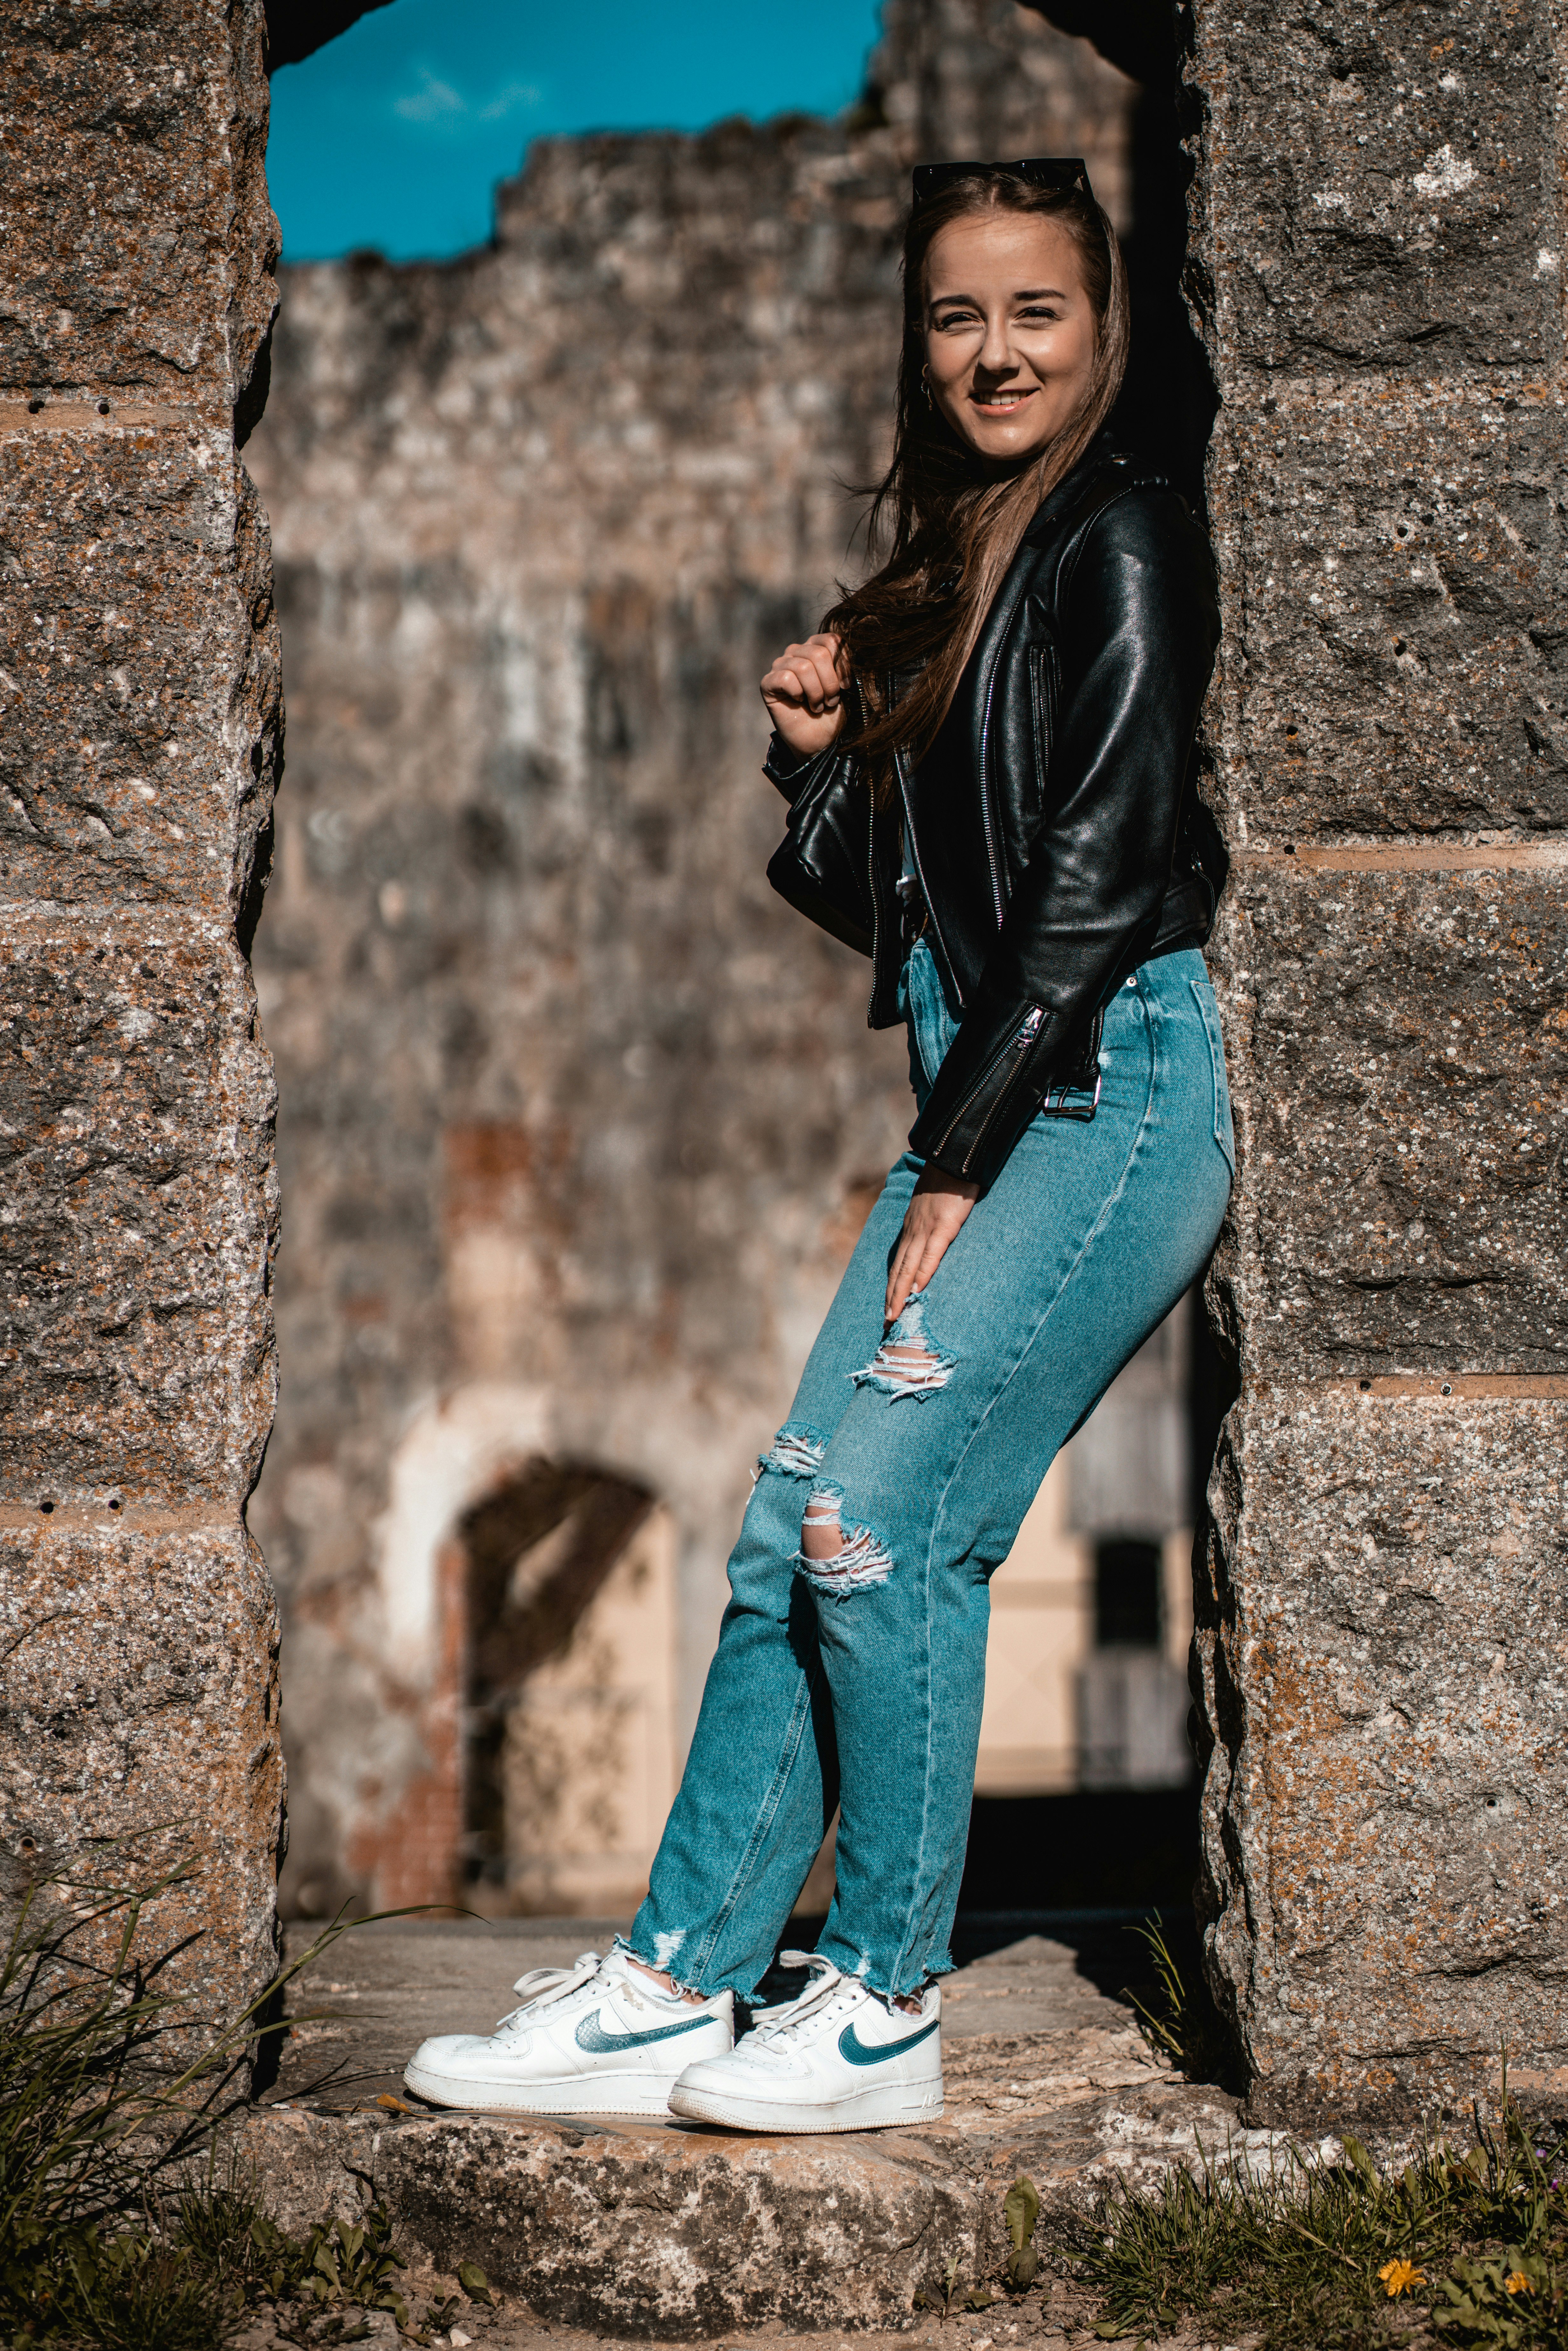 woman in black leather jacket and blue denim jeans leaning on wall